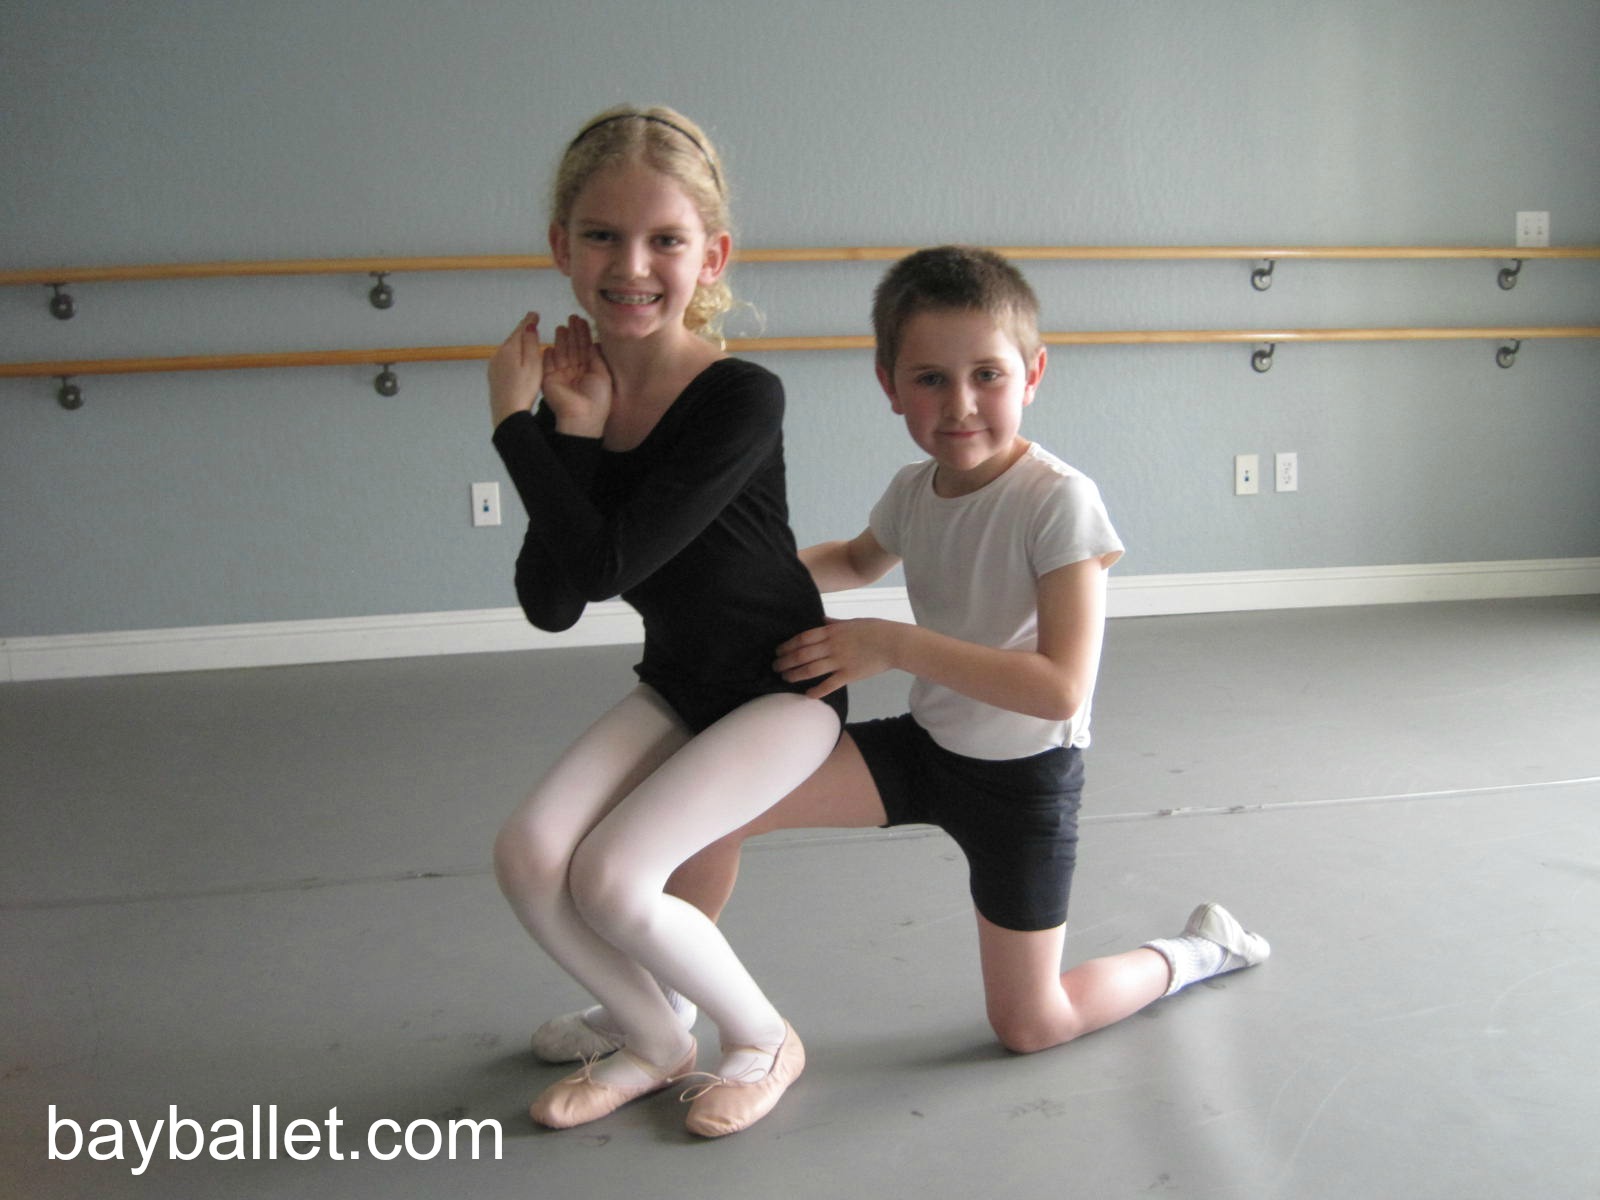 Bay Ballet Academy Students. Maximo Califano, Director & Main Dance Teacher. We offer professional dance instruction to students of all ages, size, and skill levels. We are located in Willow Glen, San Jose, CA. For more info, please visit www.bayballet.com